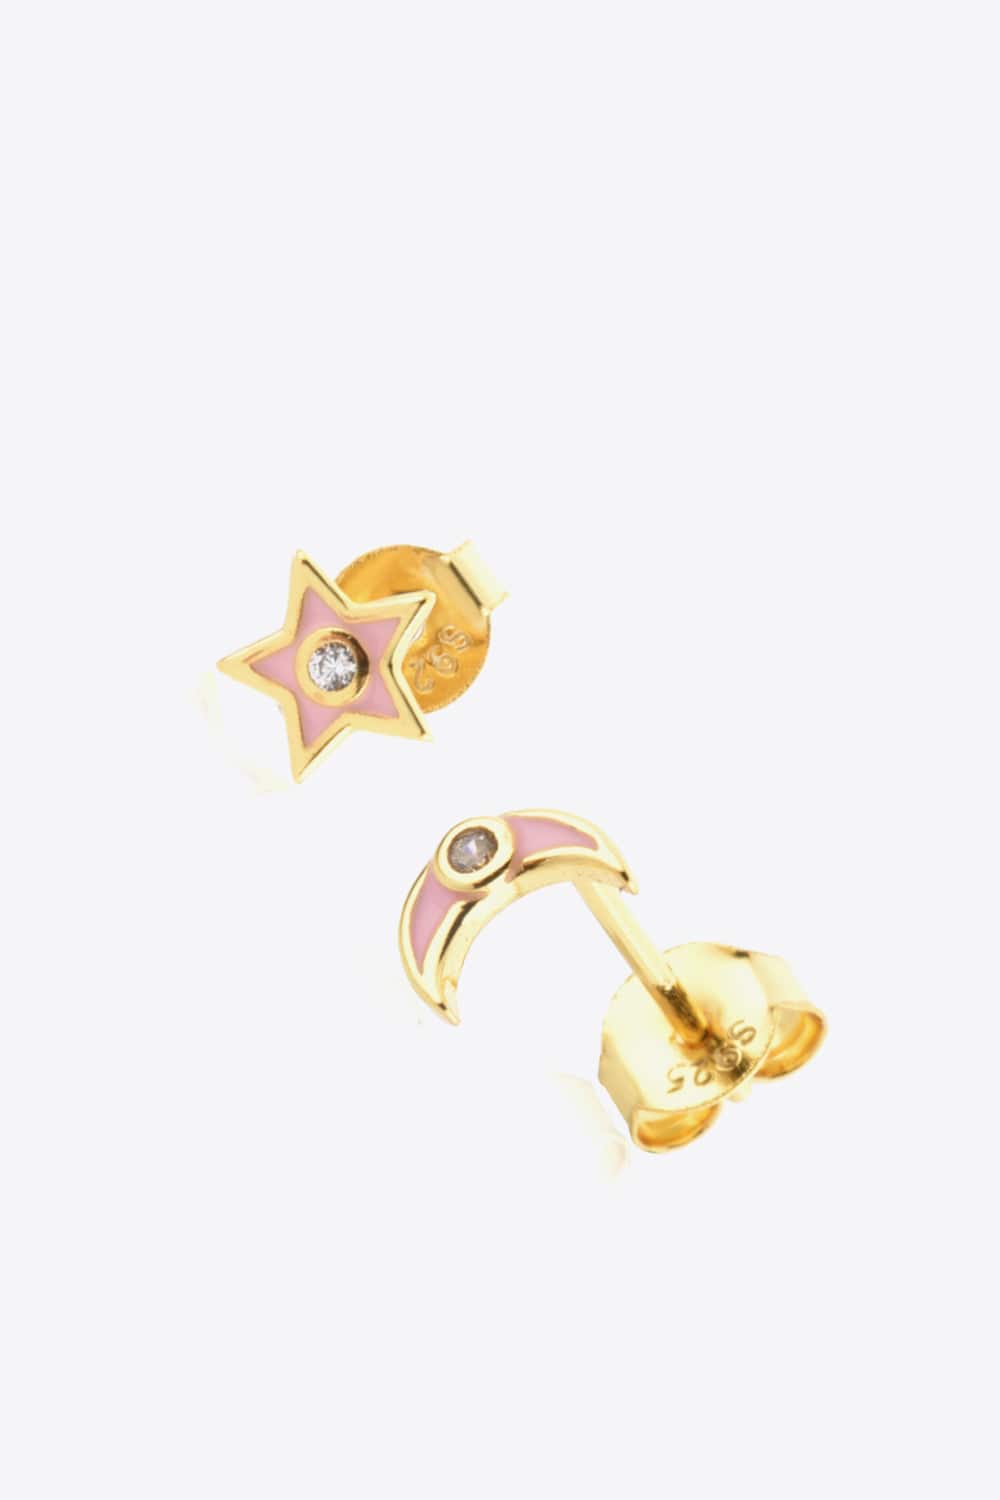 Star and Moon Zircon Mismatched Earrings - Guy Christopher 